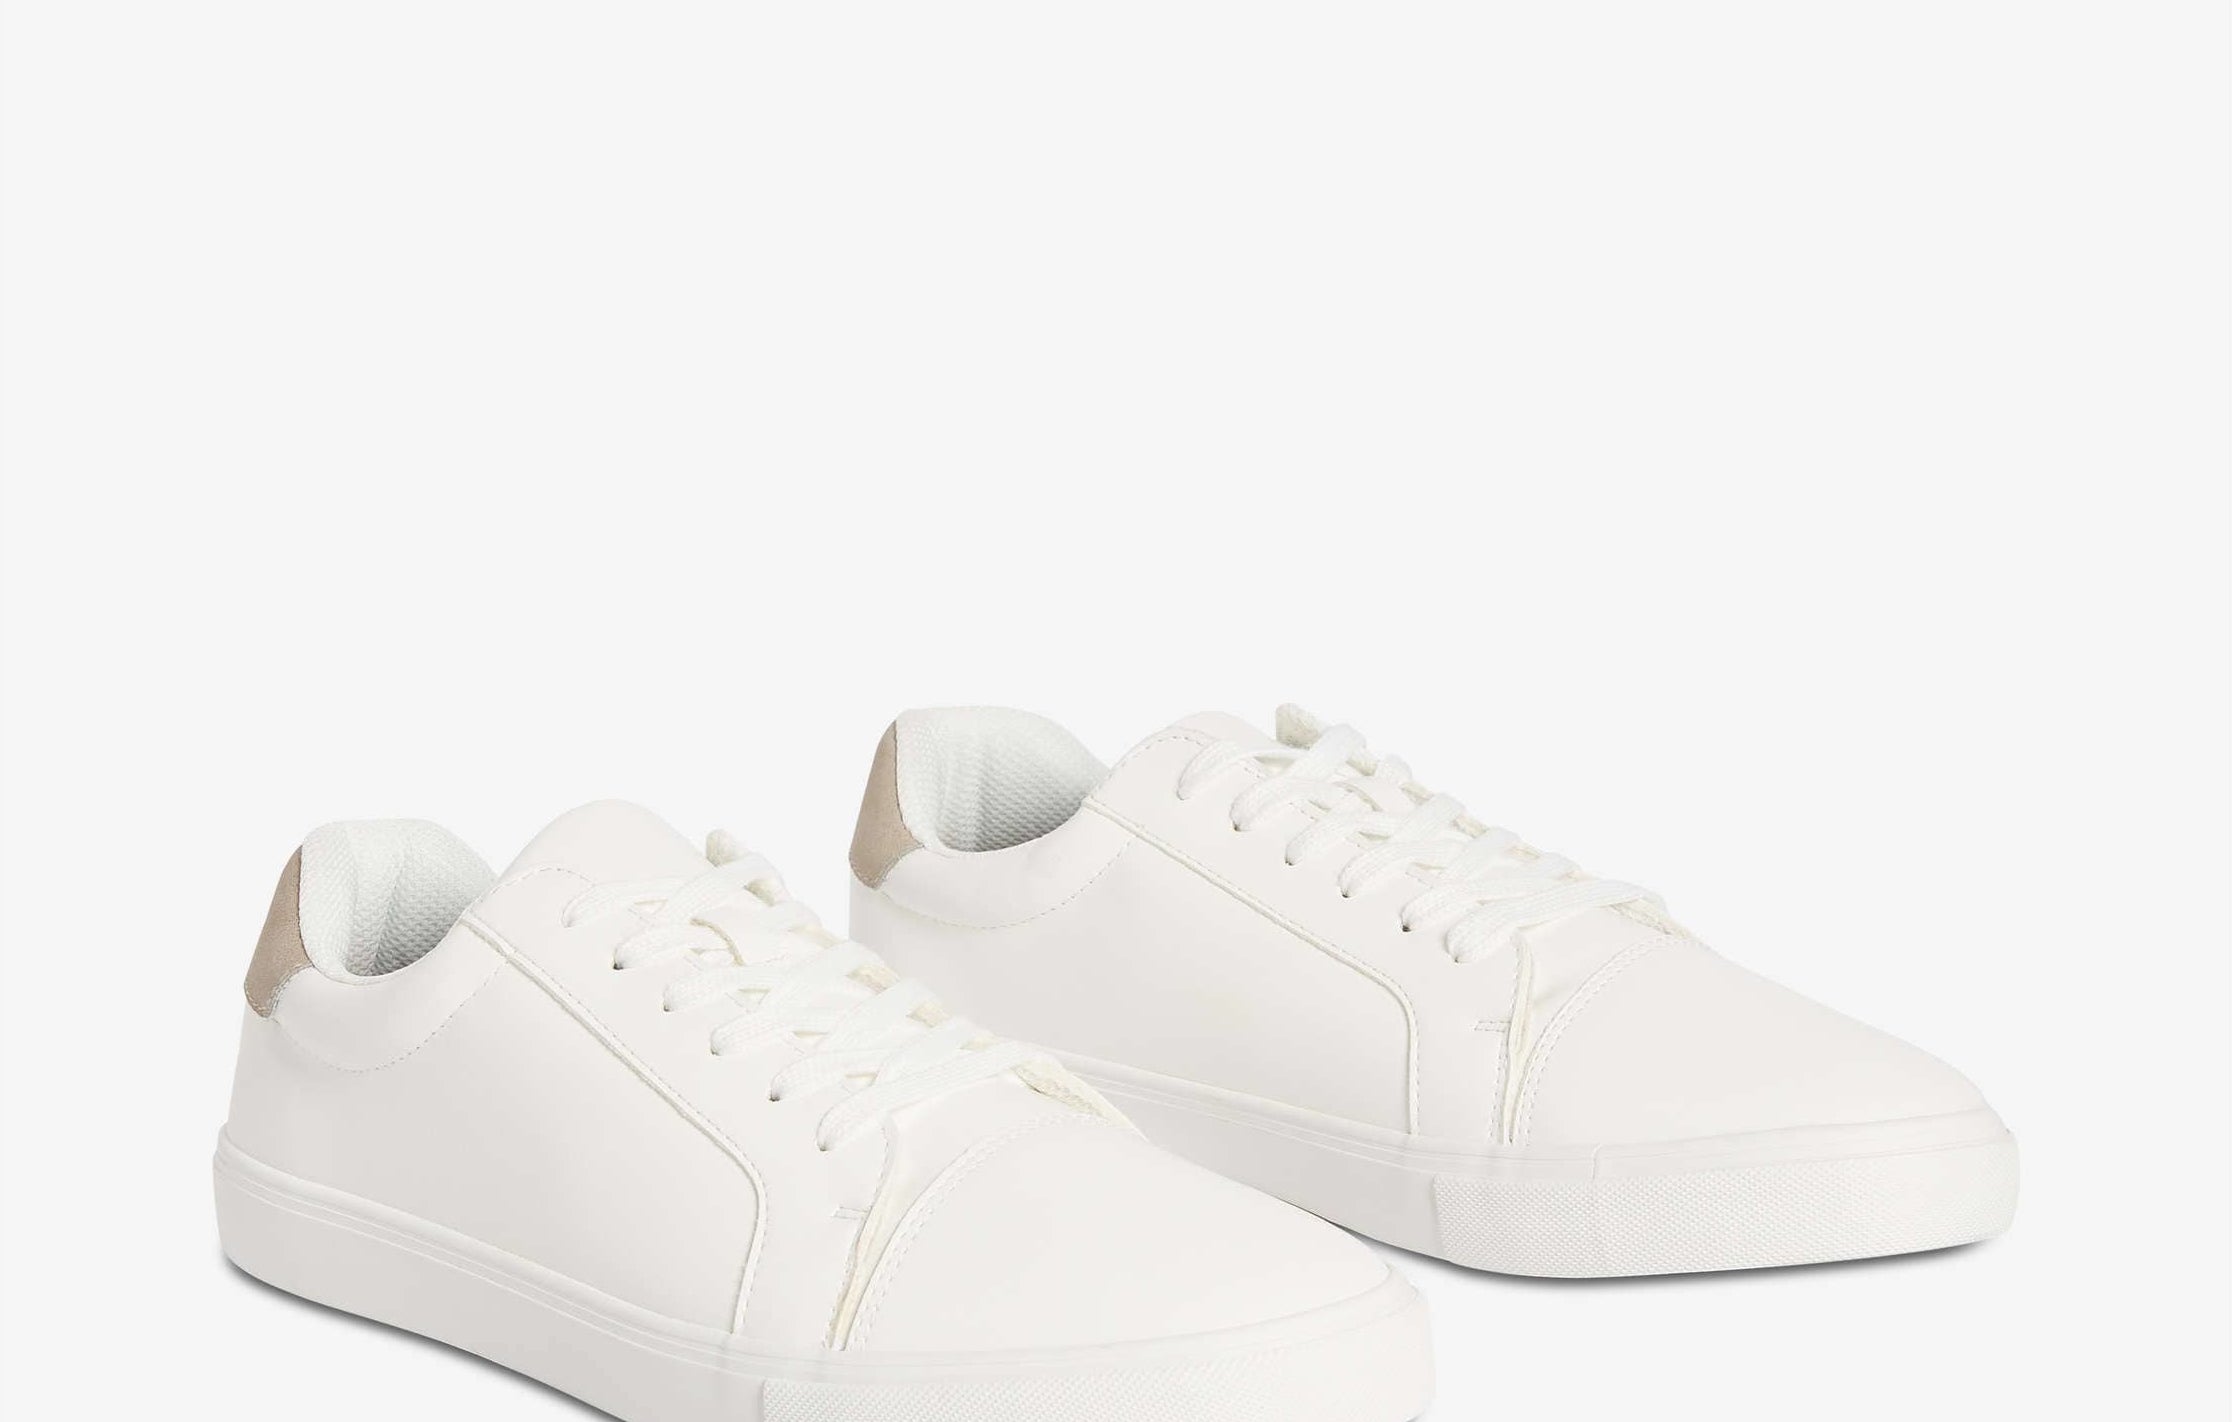 A pair of simple white sneakers on a plain background